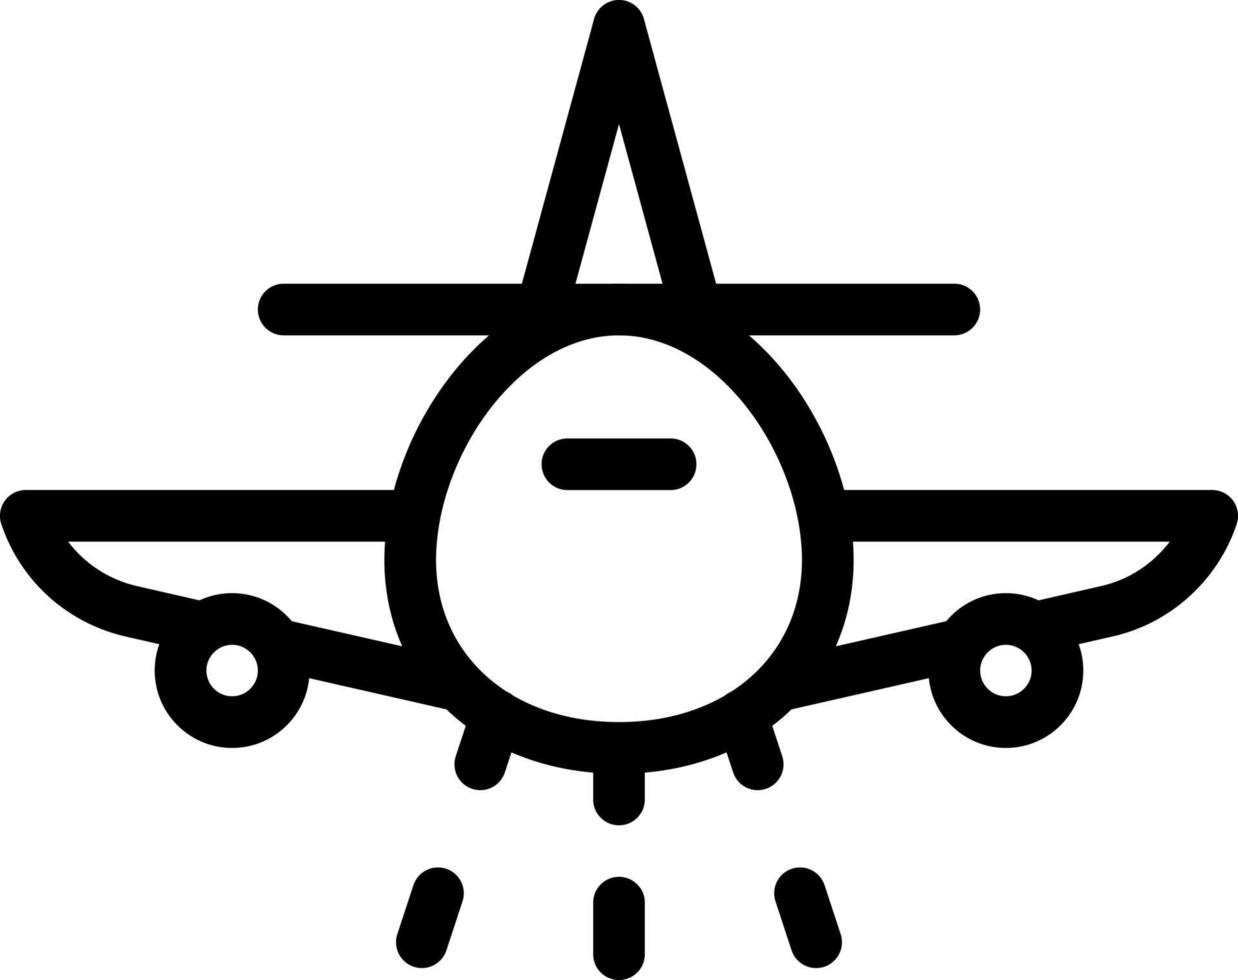 airplane vector illustration on a background.Premium quality symbols.vector icons for concept and graphic design.